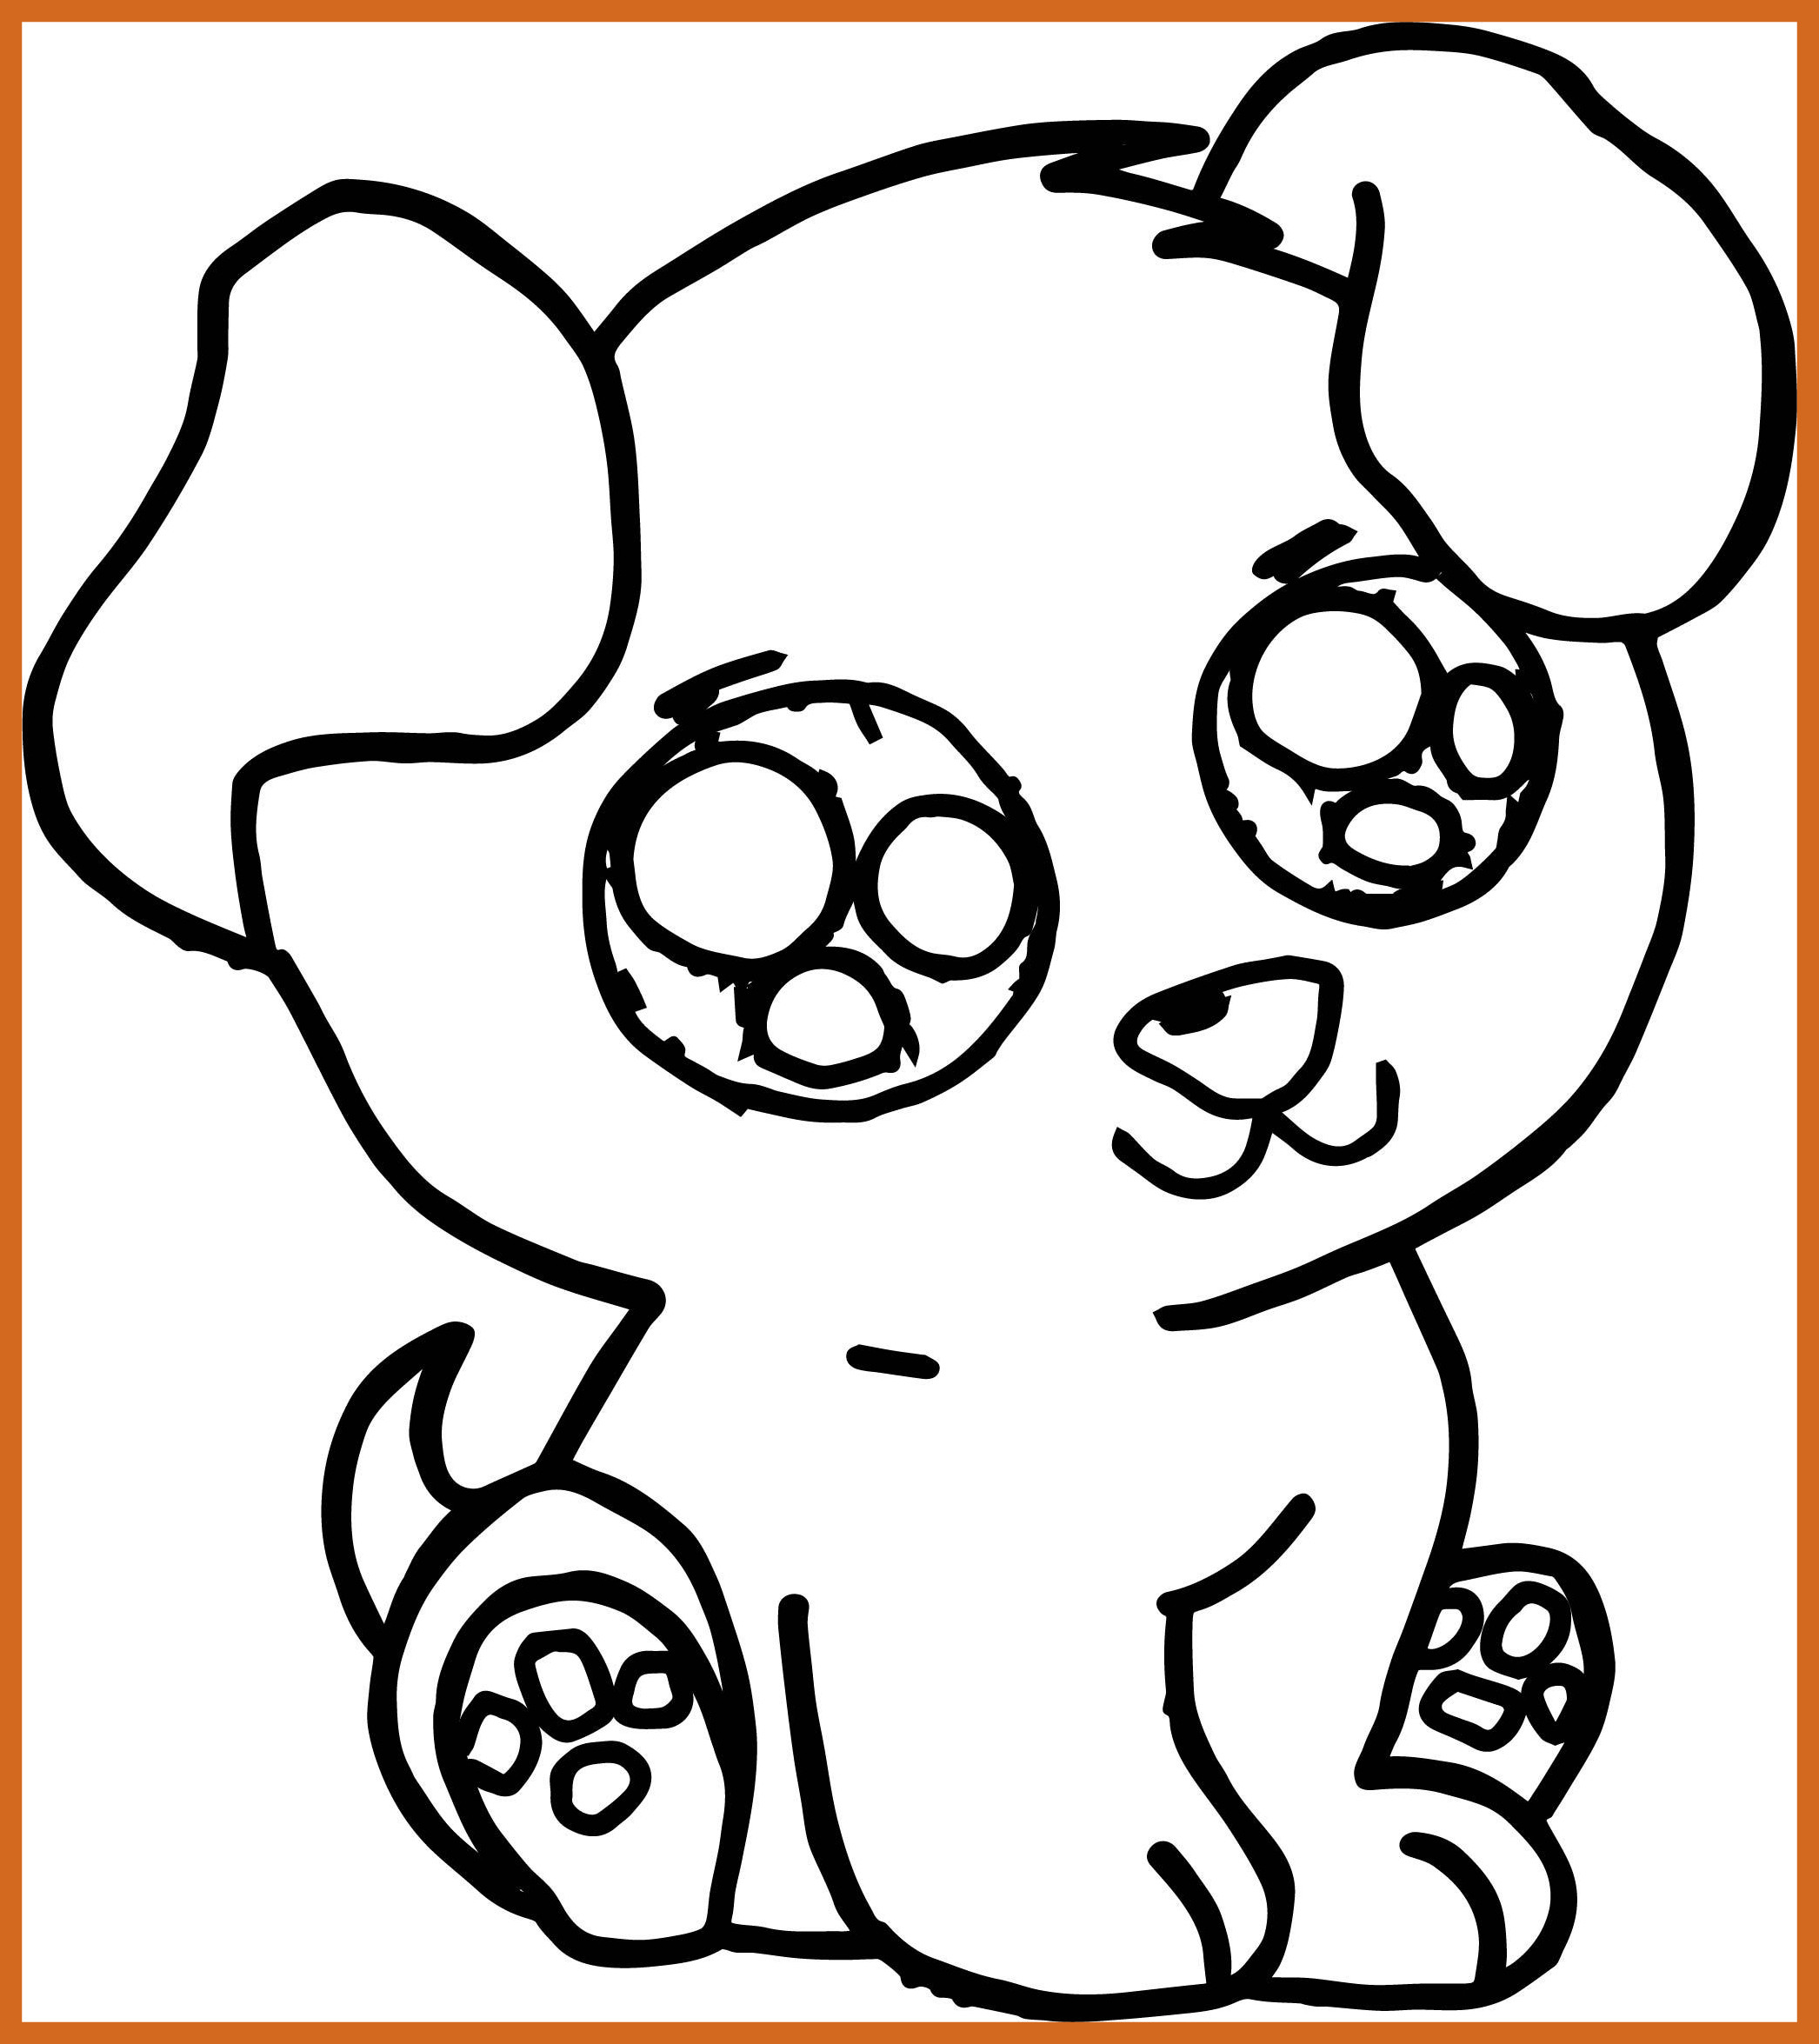 Dog Coloring Pages at GetDrawings Free download